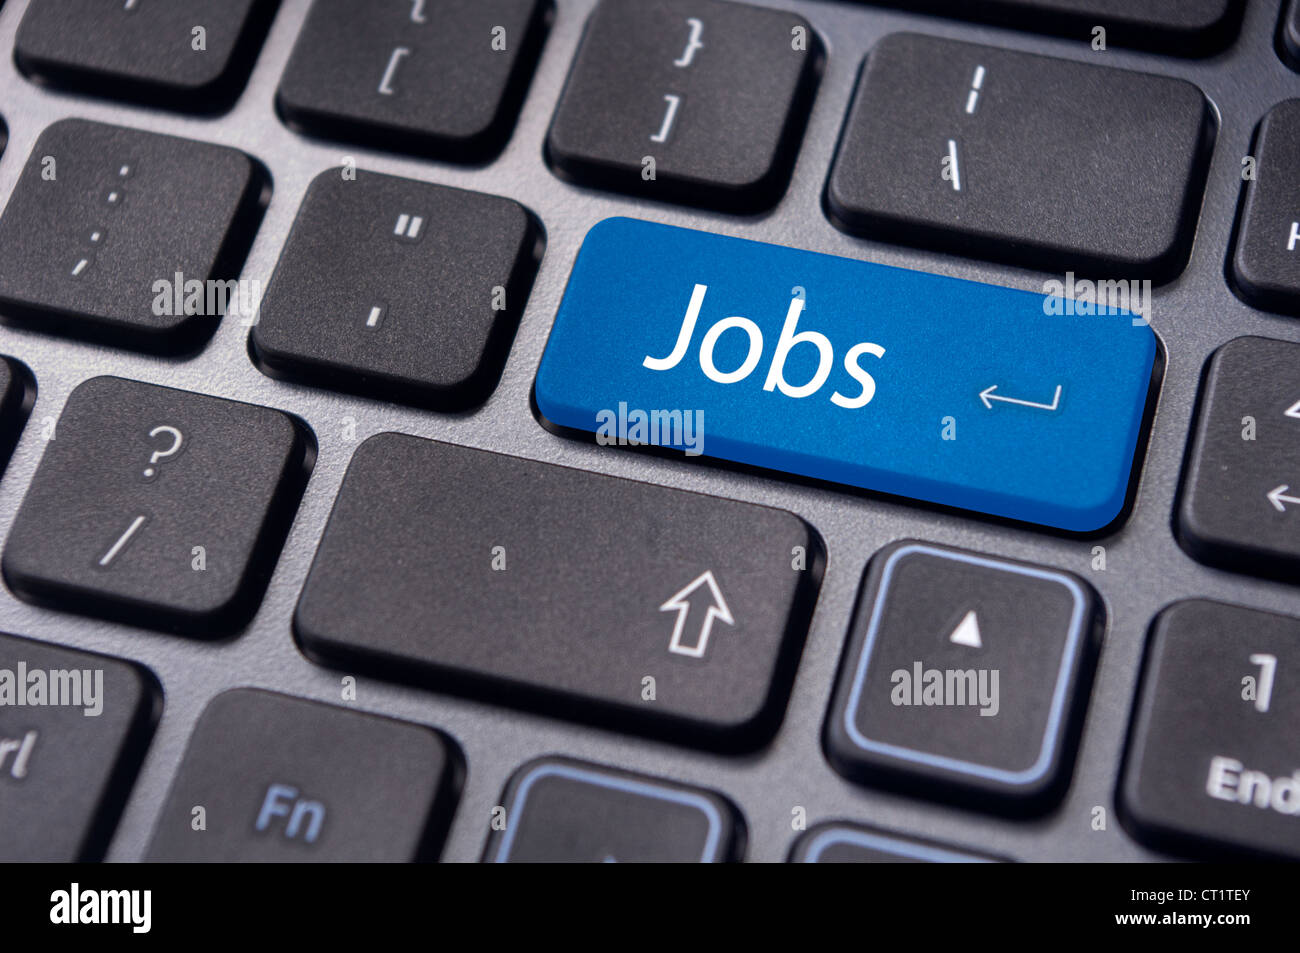 concept of job searching with a message on enter key of keyboard. Stock Photo